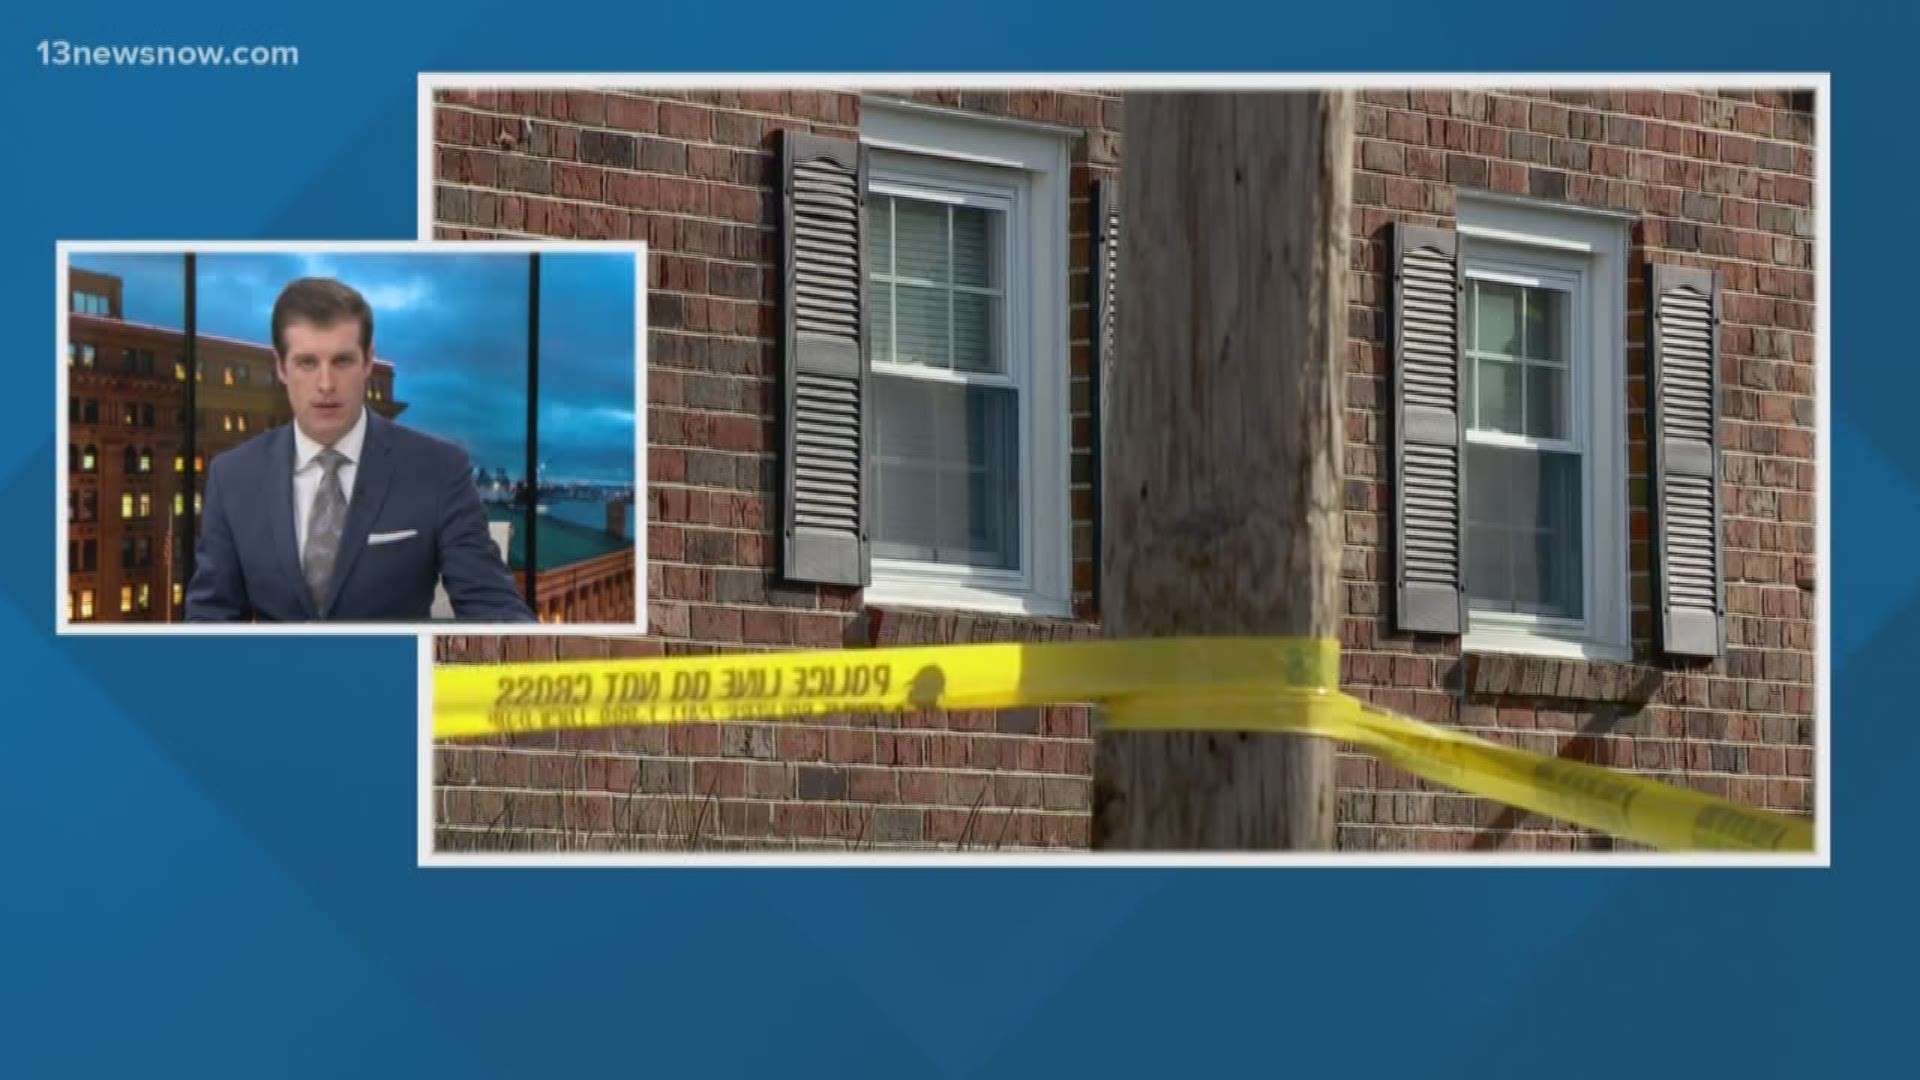 The victim is 57-year-old Jeffery D Tyree who was shot and killed by a police officer in Virginia Beach.